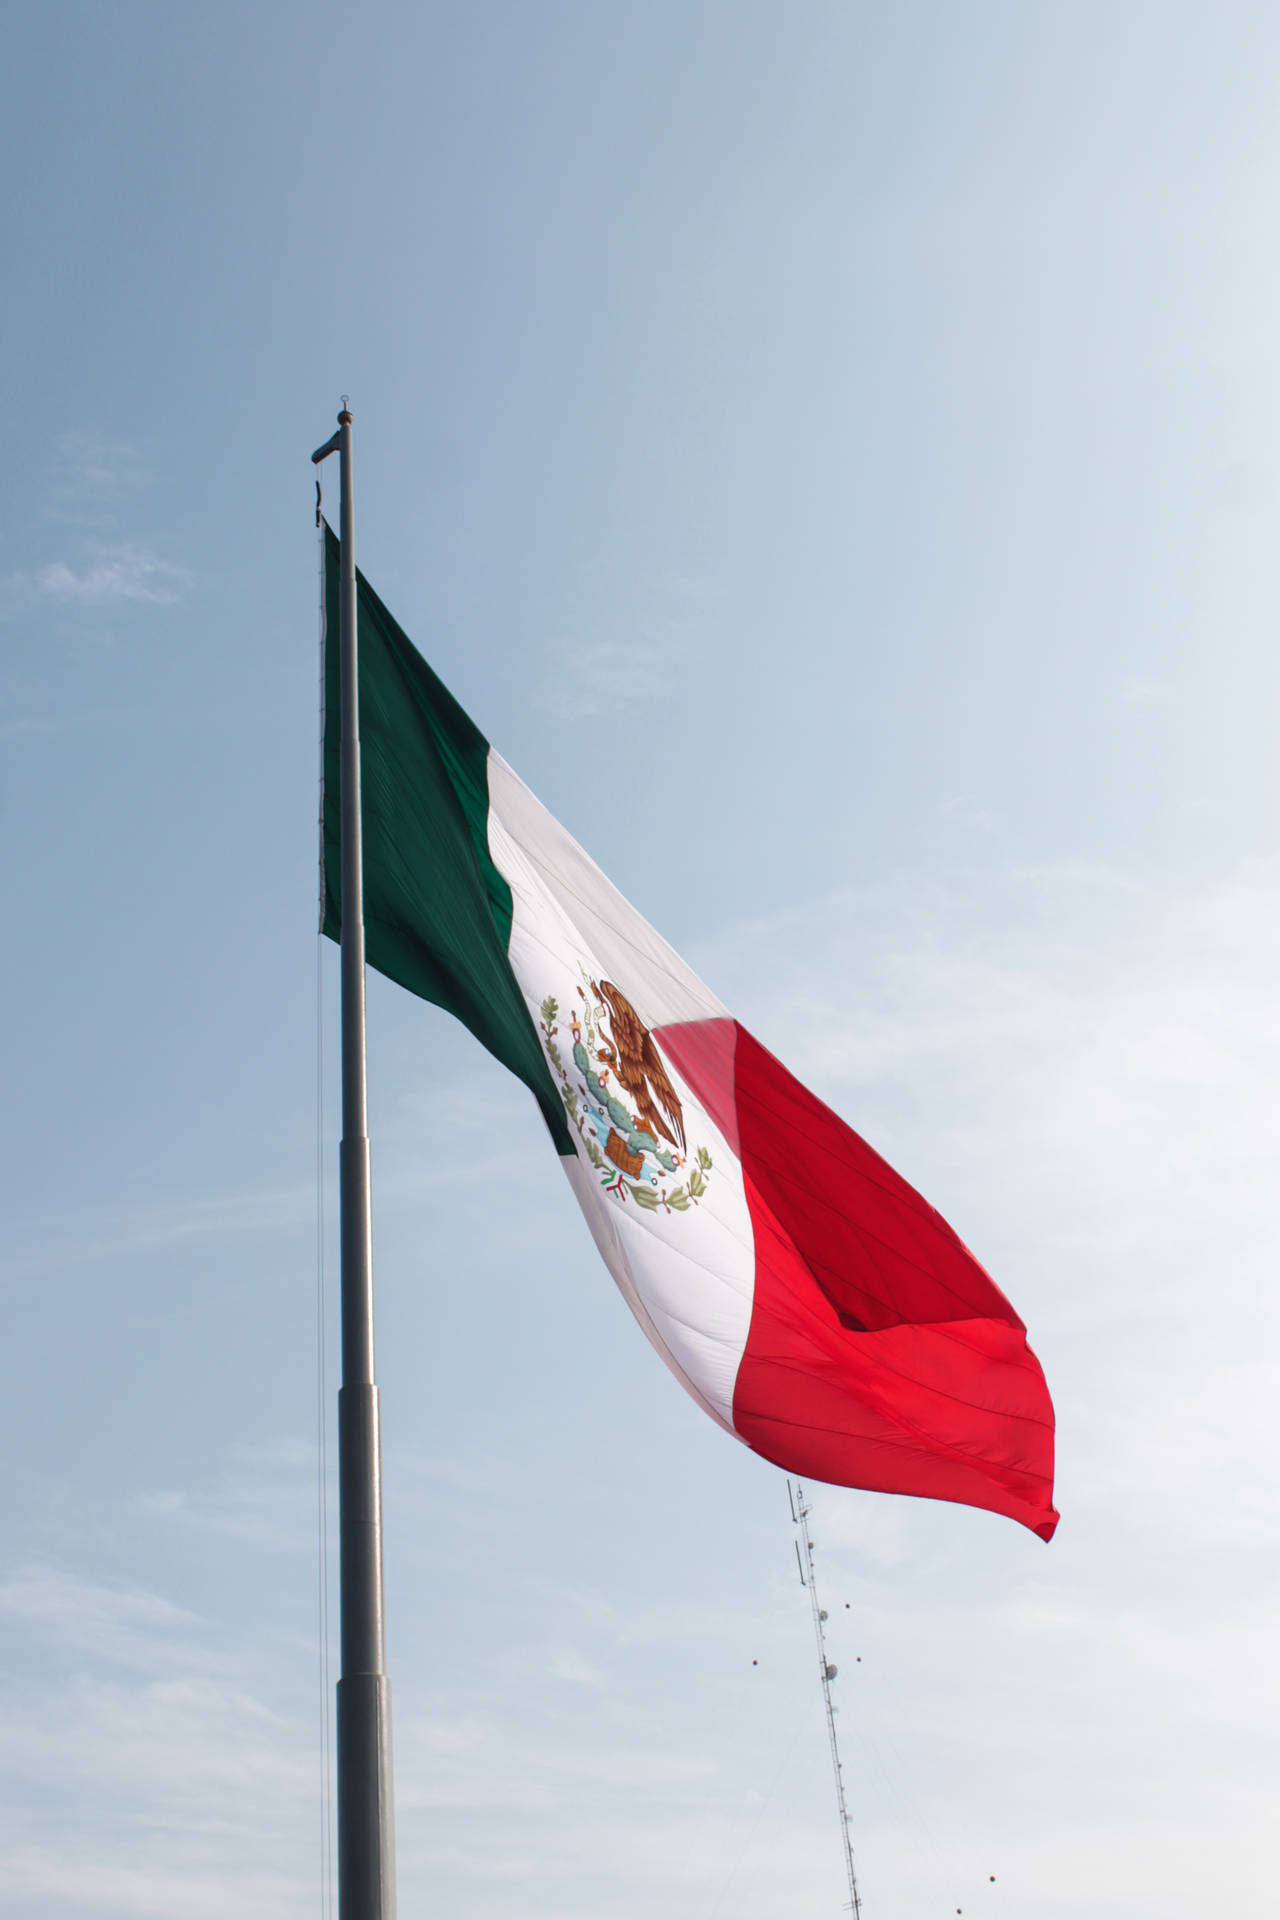 Mexican 2564X3846 Wallpaper and Background Image